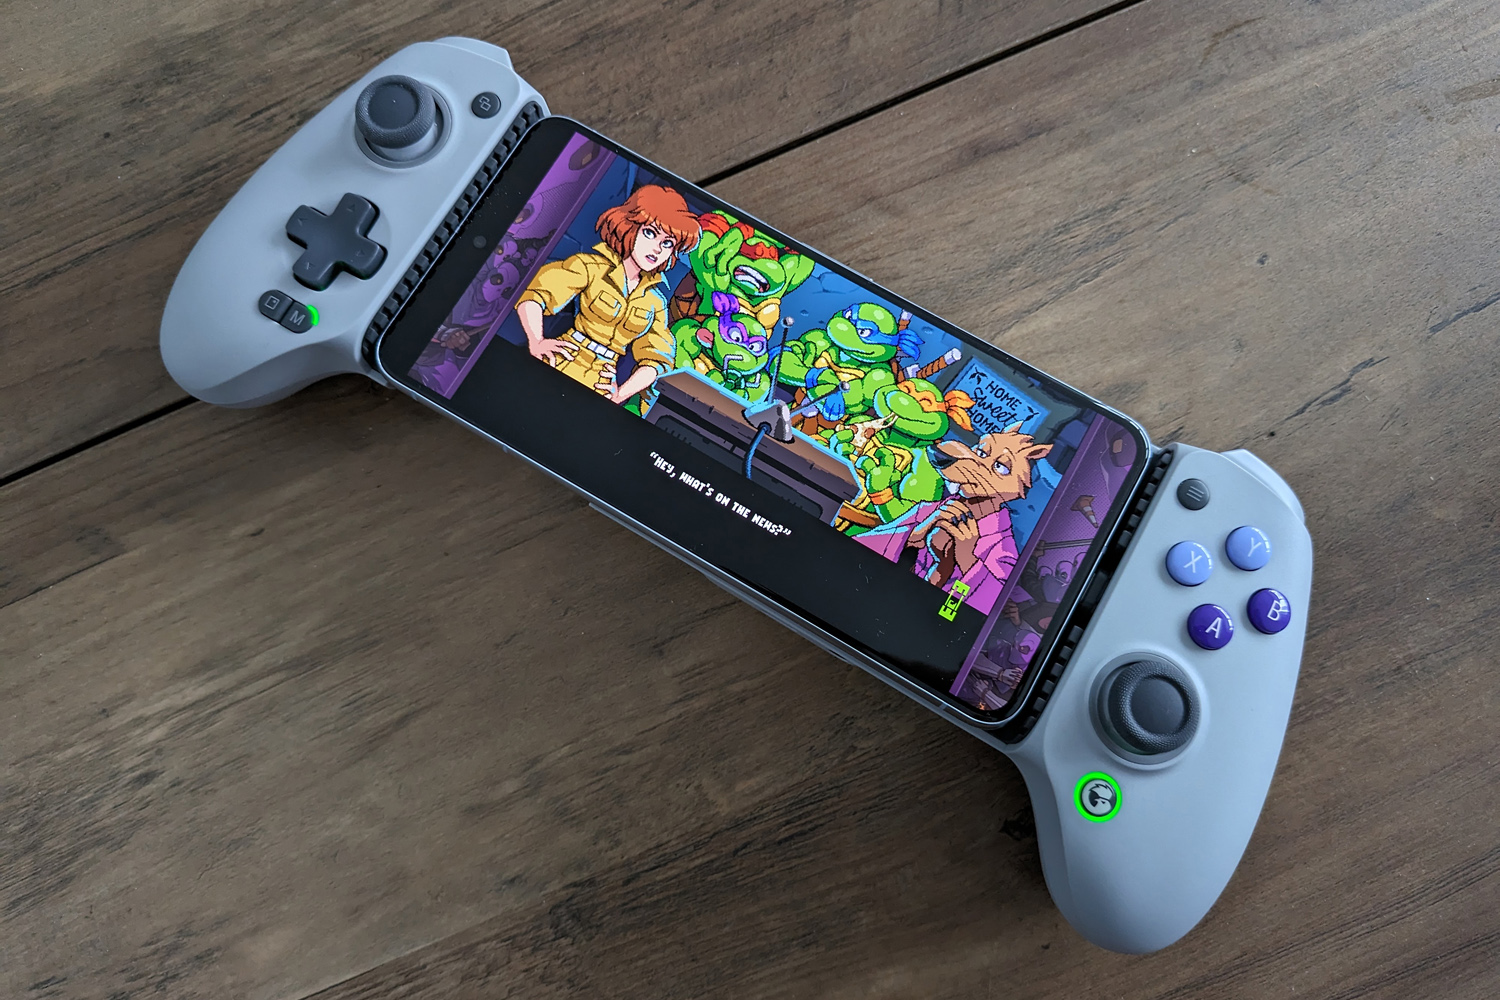 GameSir launches the G8 Galileo: The Ultimate Mobile Gaming